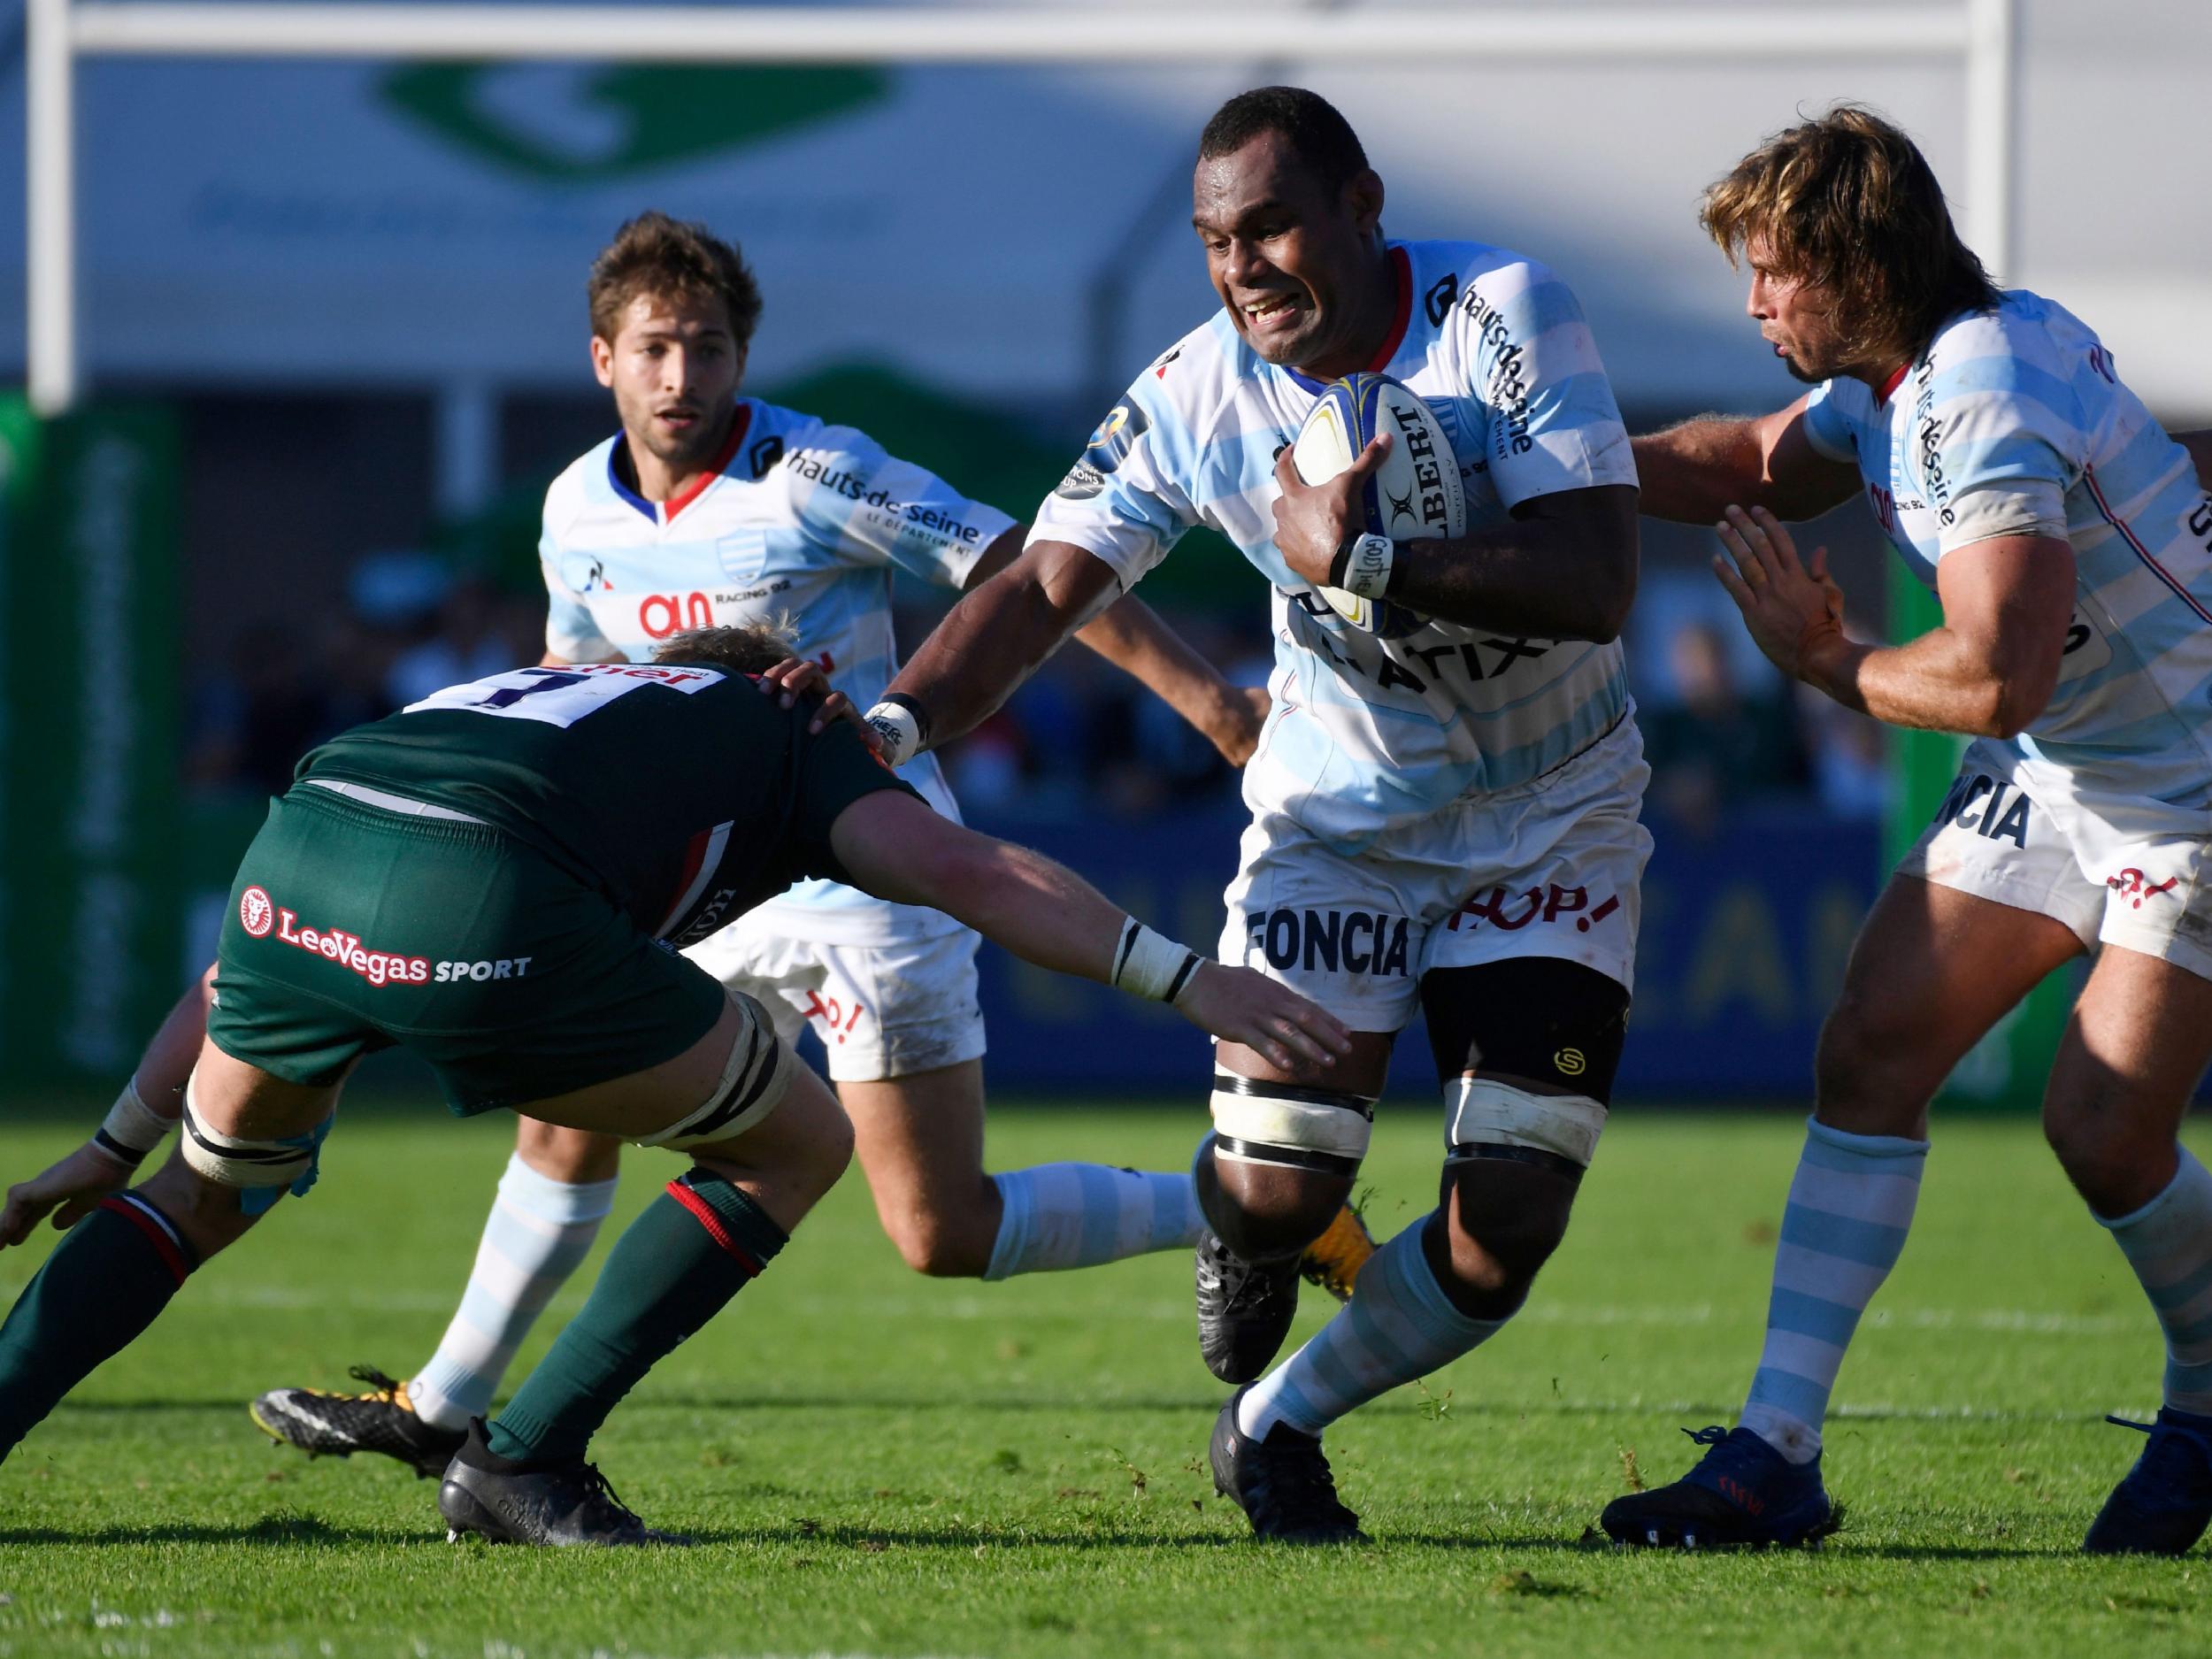 Nakarawa is already a player of the year candidate